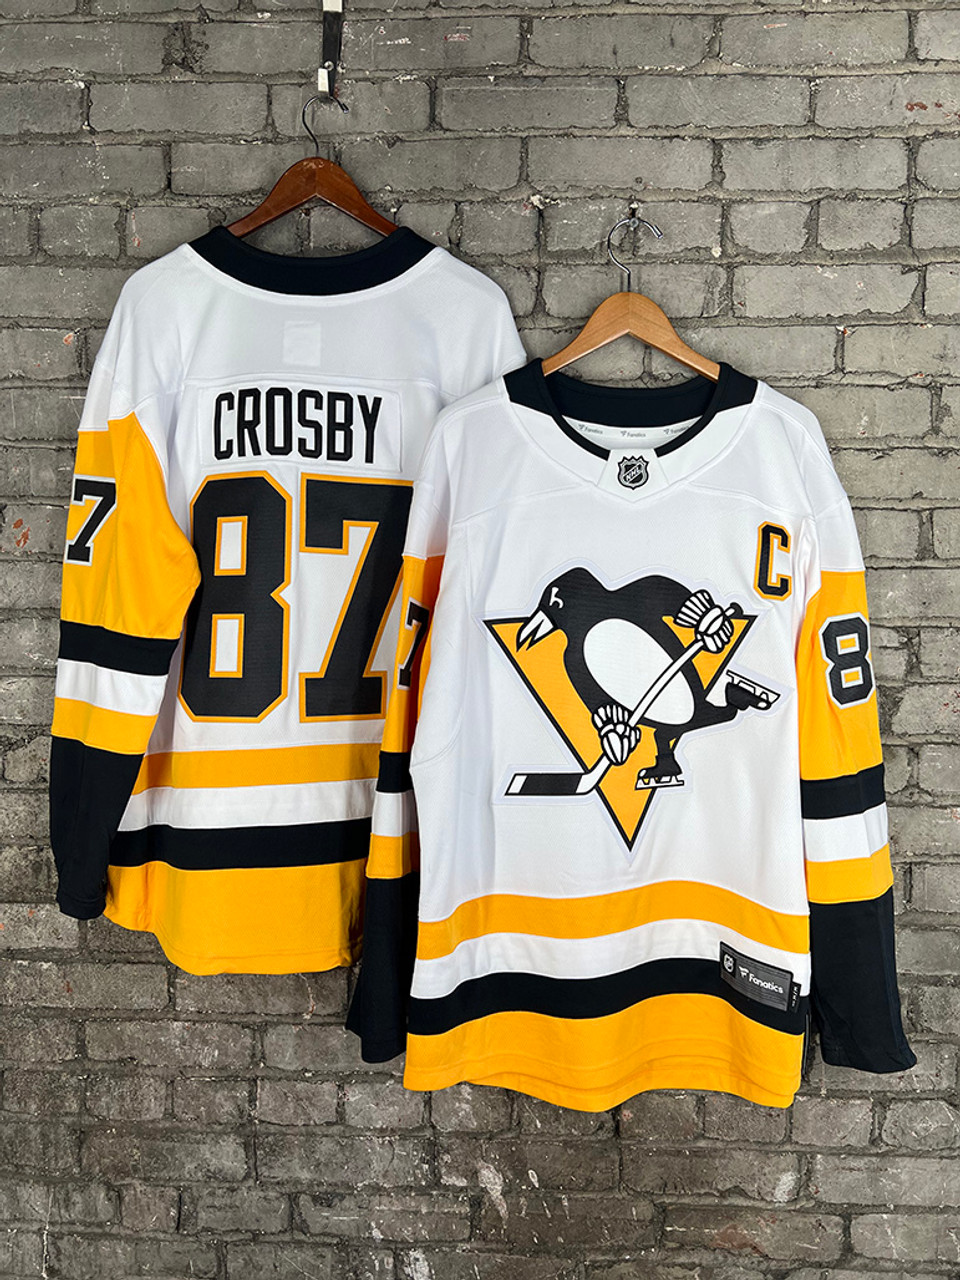 Pittsburgh Sports - Pittsburgh Penguins - Penguins Jerseys - Yinzers in the  Burgh